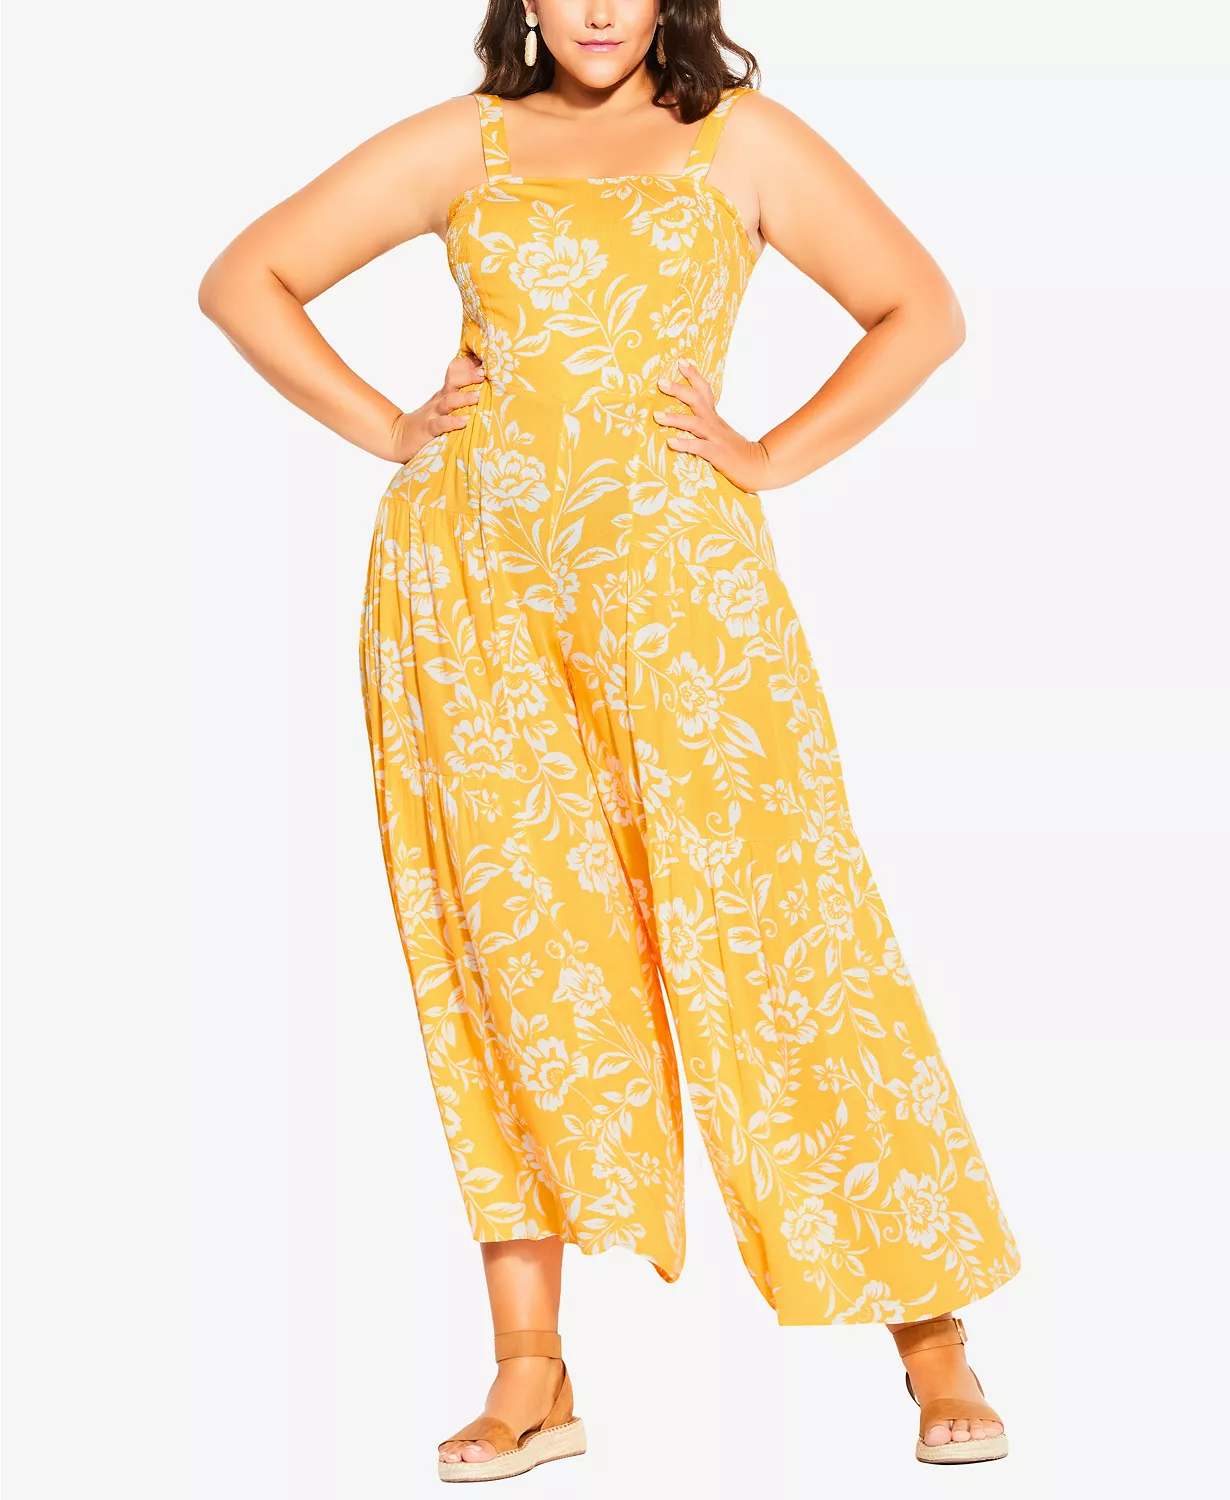 Yellow Tropical Plus Size Wedding Guest Jumpsuit for Beach Wedding, Summer Wedding, or Vacation